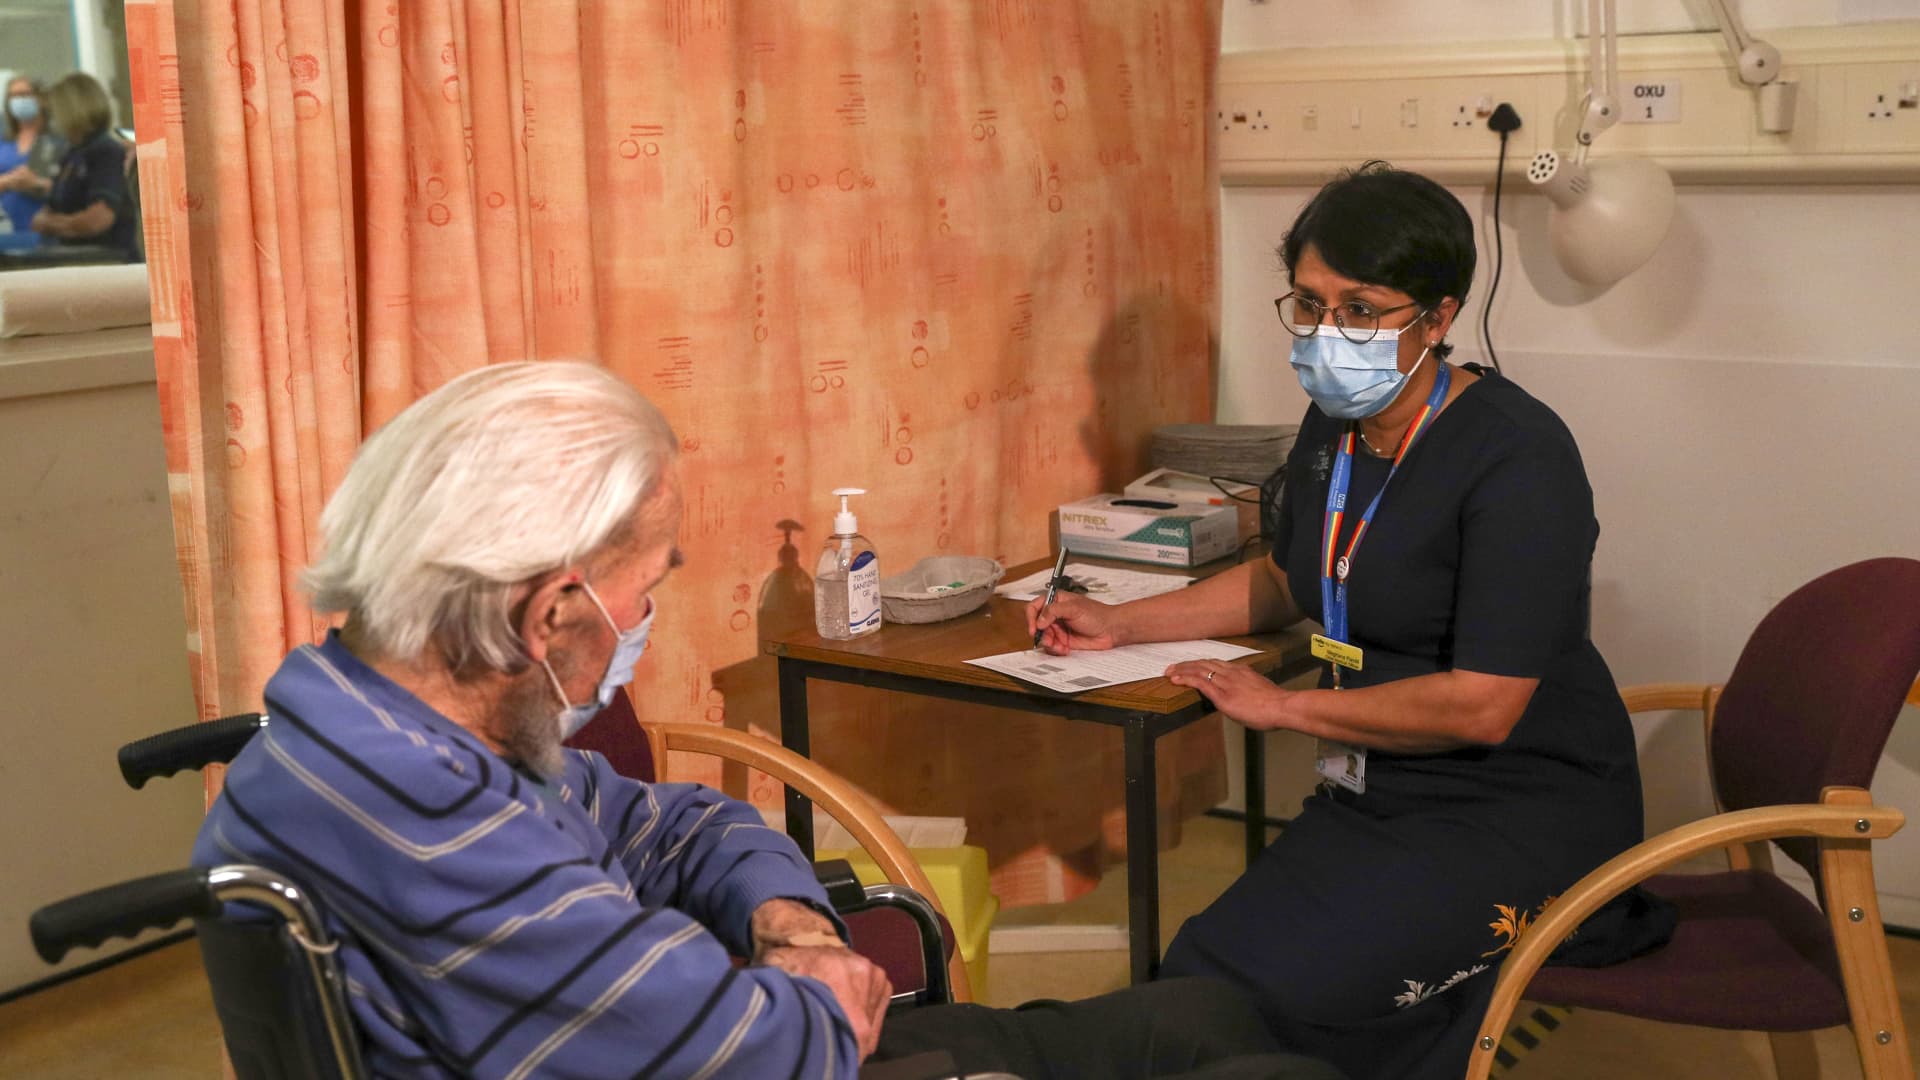 Meghana Pandit, chief medical officer at the Oxford University NHS Trust, right, speaks to Trevor Cowlett, 88, ahead of him receiving the AstraZeneca Plc and the University of Oxford Covid-19 vaccine at the Churchill Hospital in Oxford, U.K., on Monday, Jan. 4, 2021. U.K. regulators cleared the shot last week, marking its first approval worldwide.